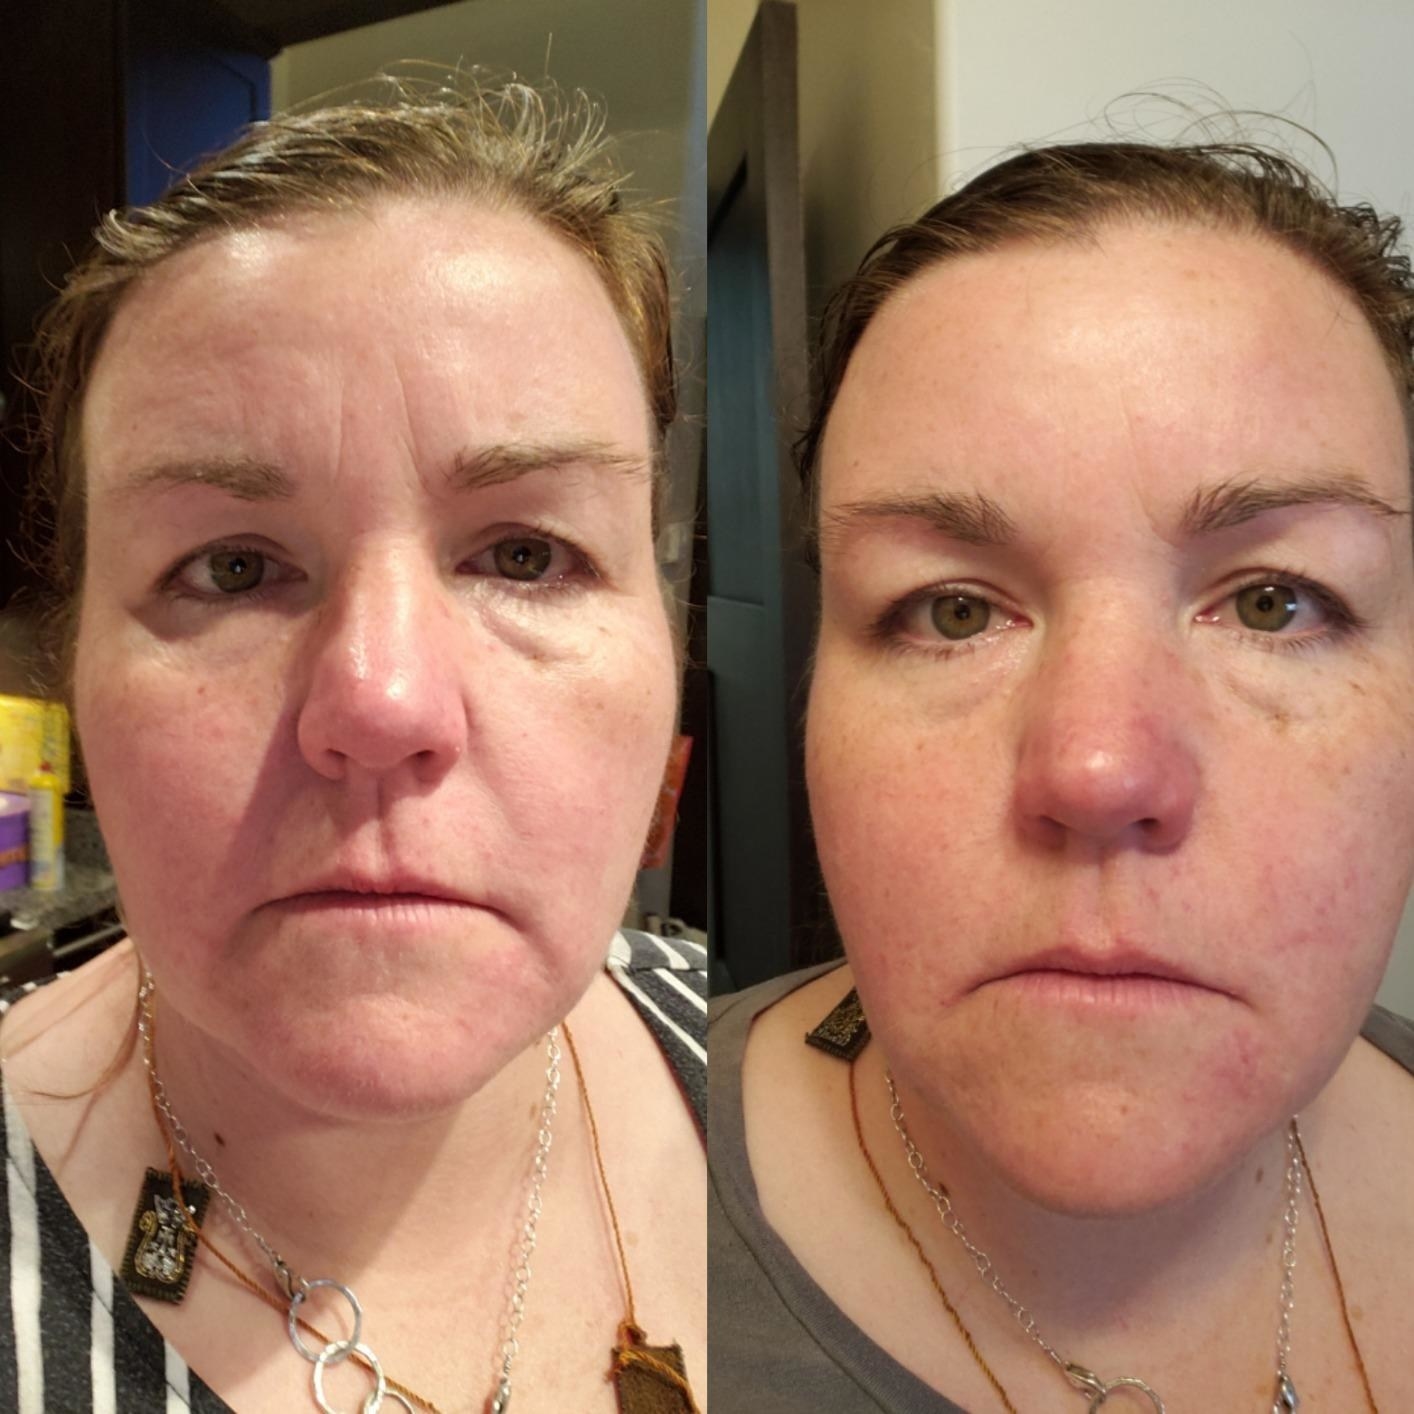 before and after showing the cream reduced the reviewer&#x27;s wrinkles and made their face look plumper